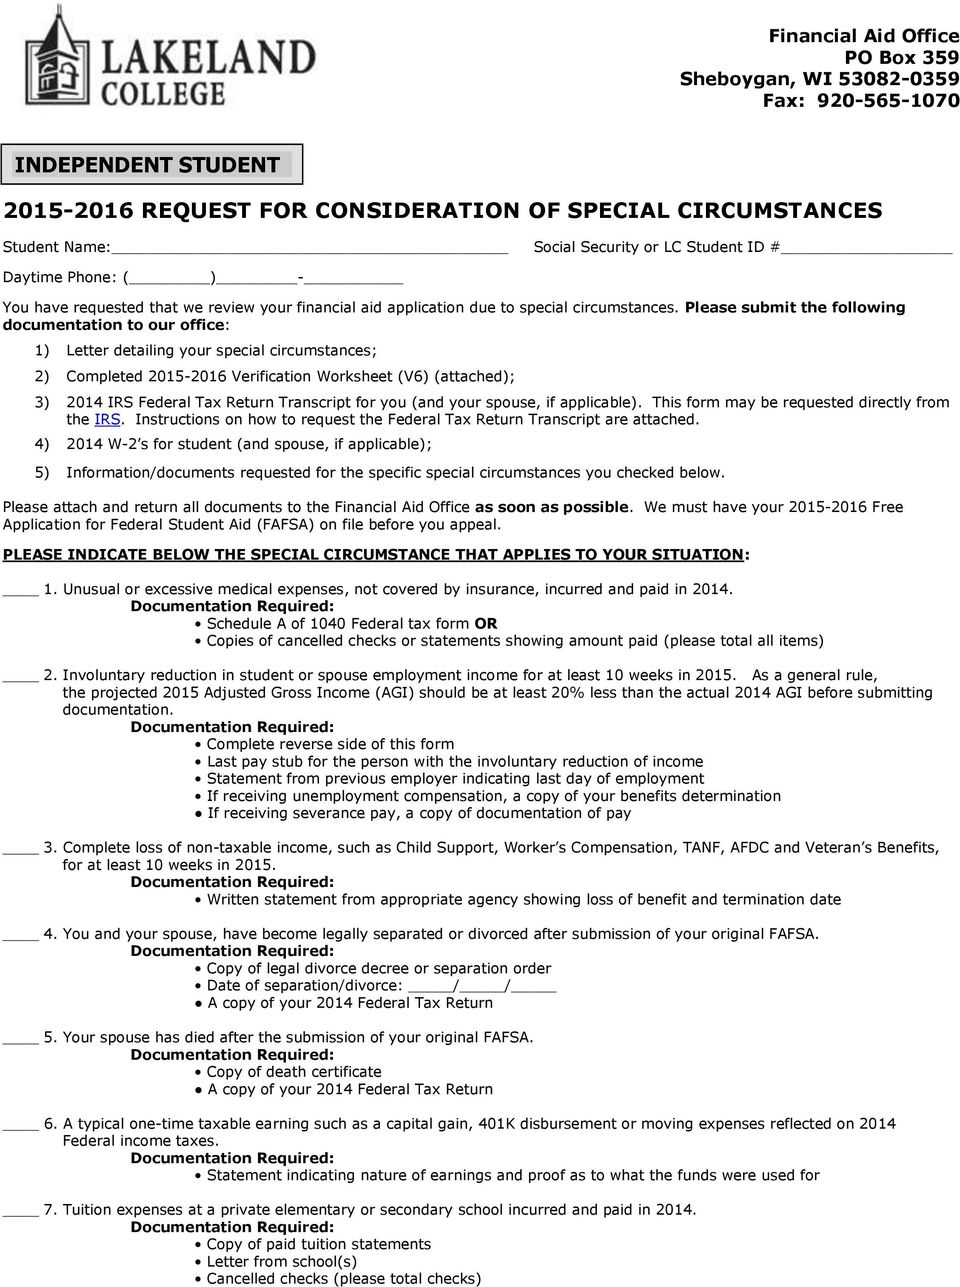 Please submit the following documentation to our office: 1) Letter detailing your special circumstances; 2) Completed 2015-2016 Verification Worksheet (V6) (attached); 3) 2014 IRS Federal Tax Return